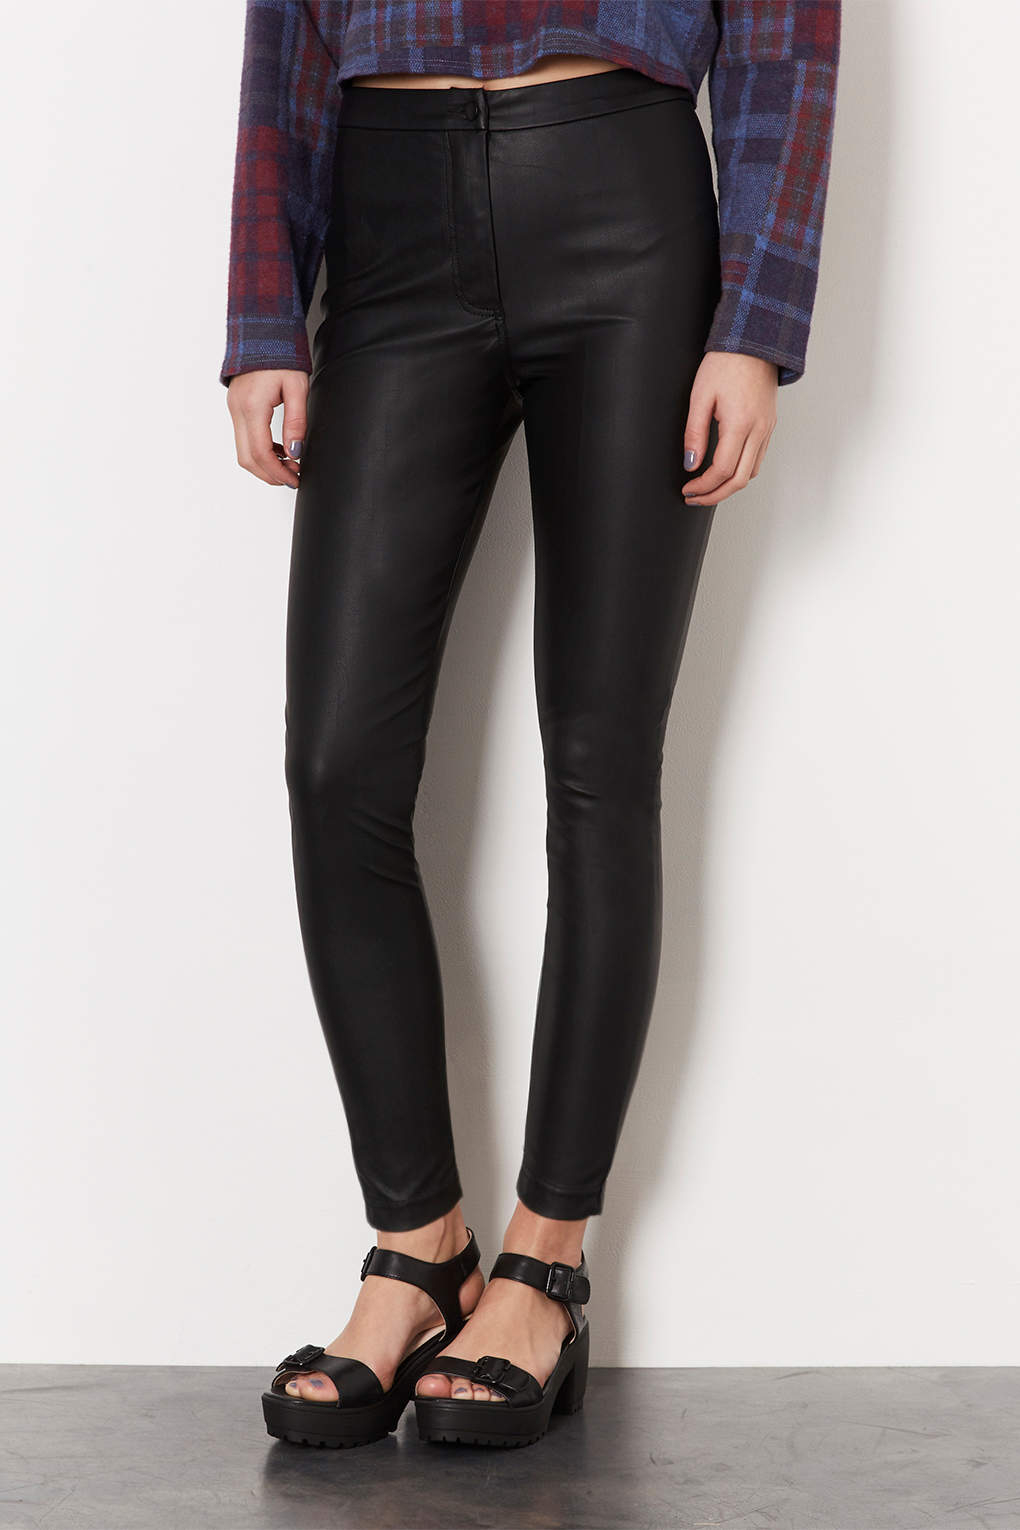 leather look jeans topshop